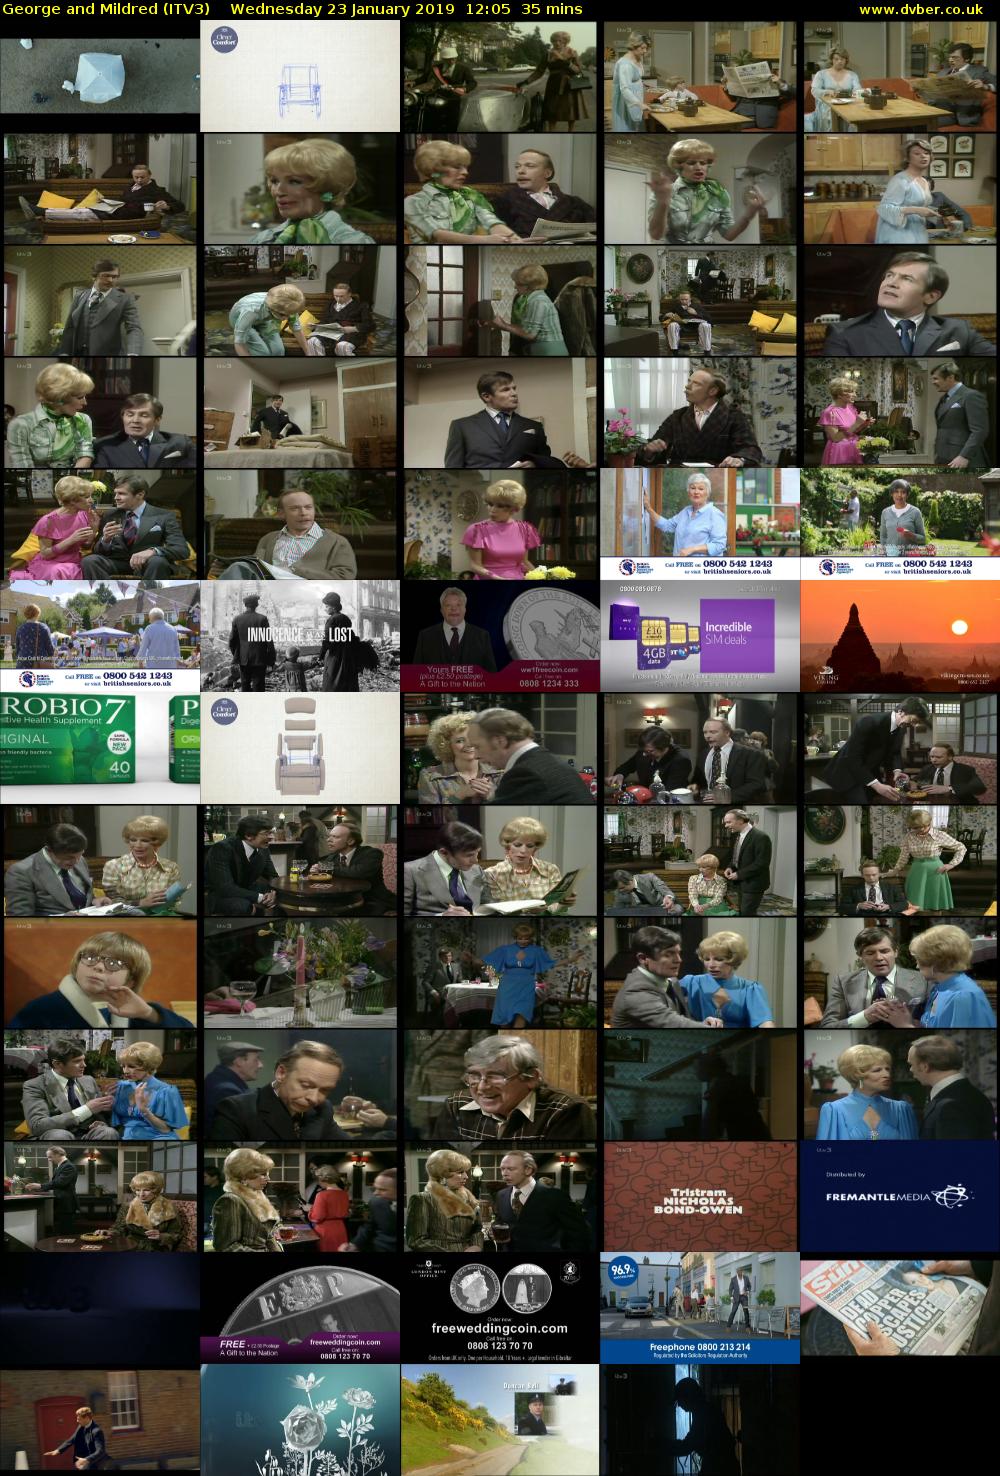 George and Mildred (ITV3) Wednesday 23 January 2019 12:05 - 12:40